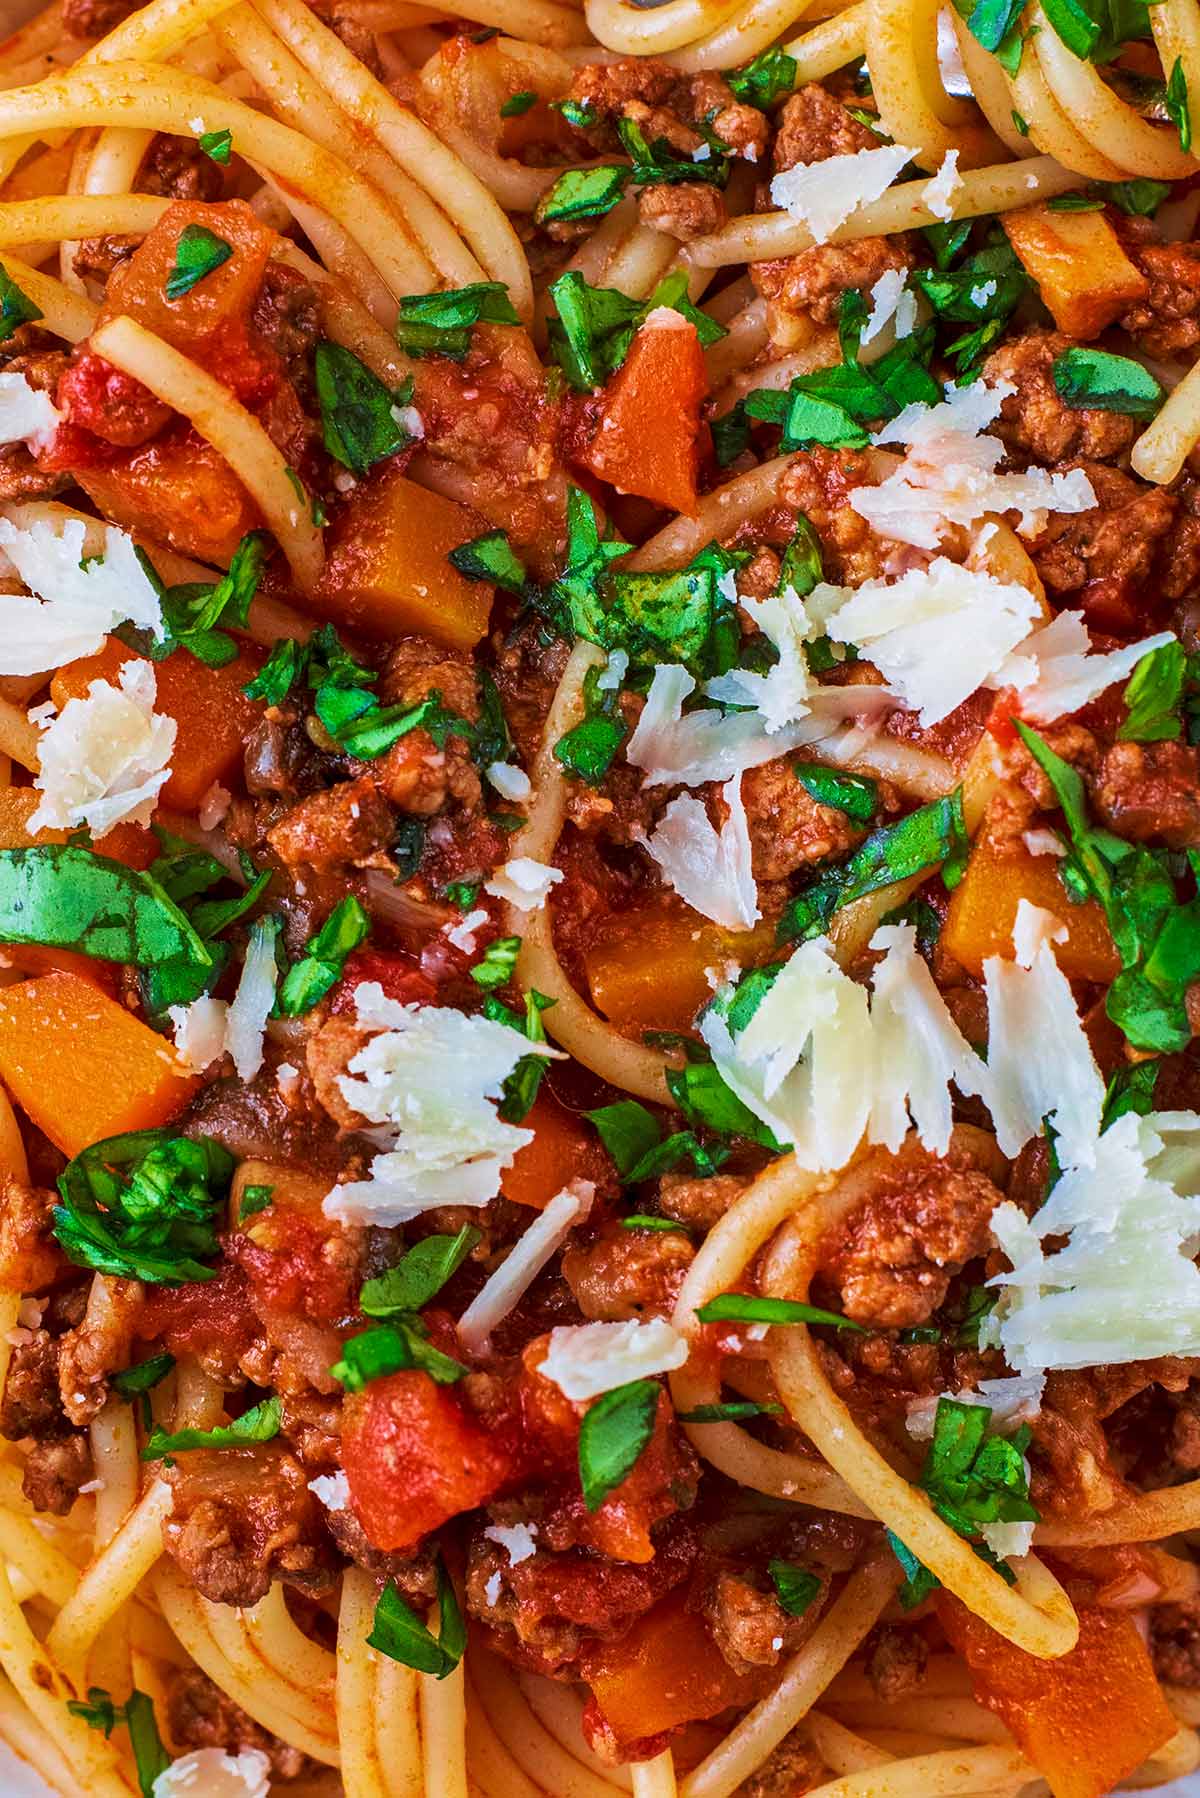 Bolognese mixed with spaghetti, topped with basil and Parmesan.